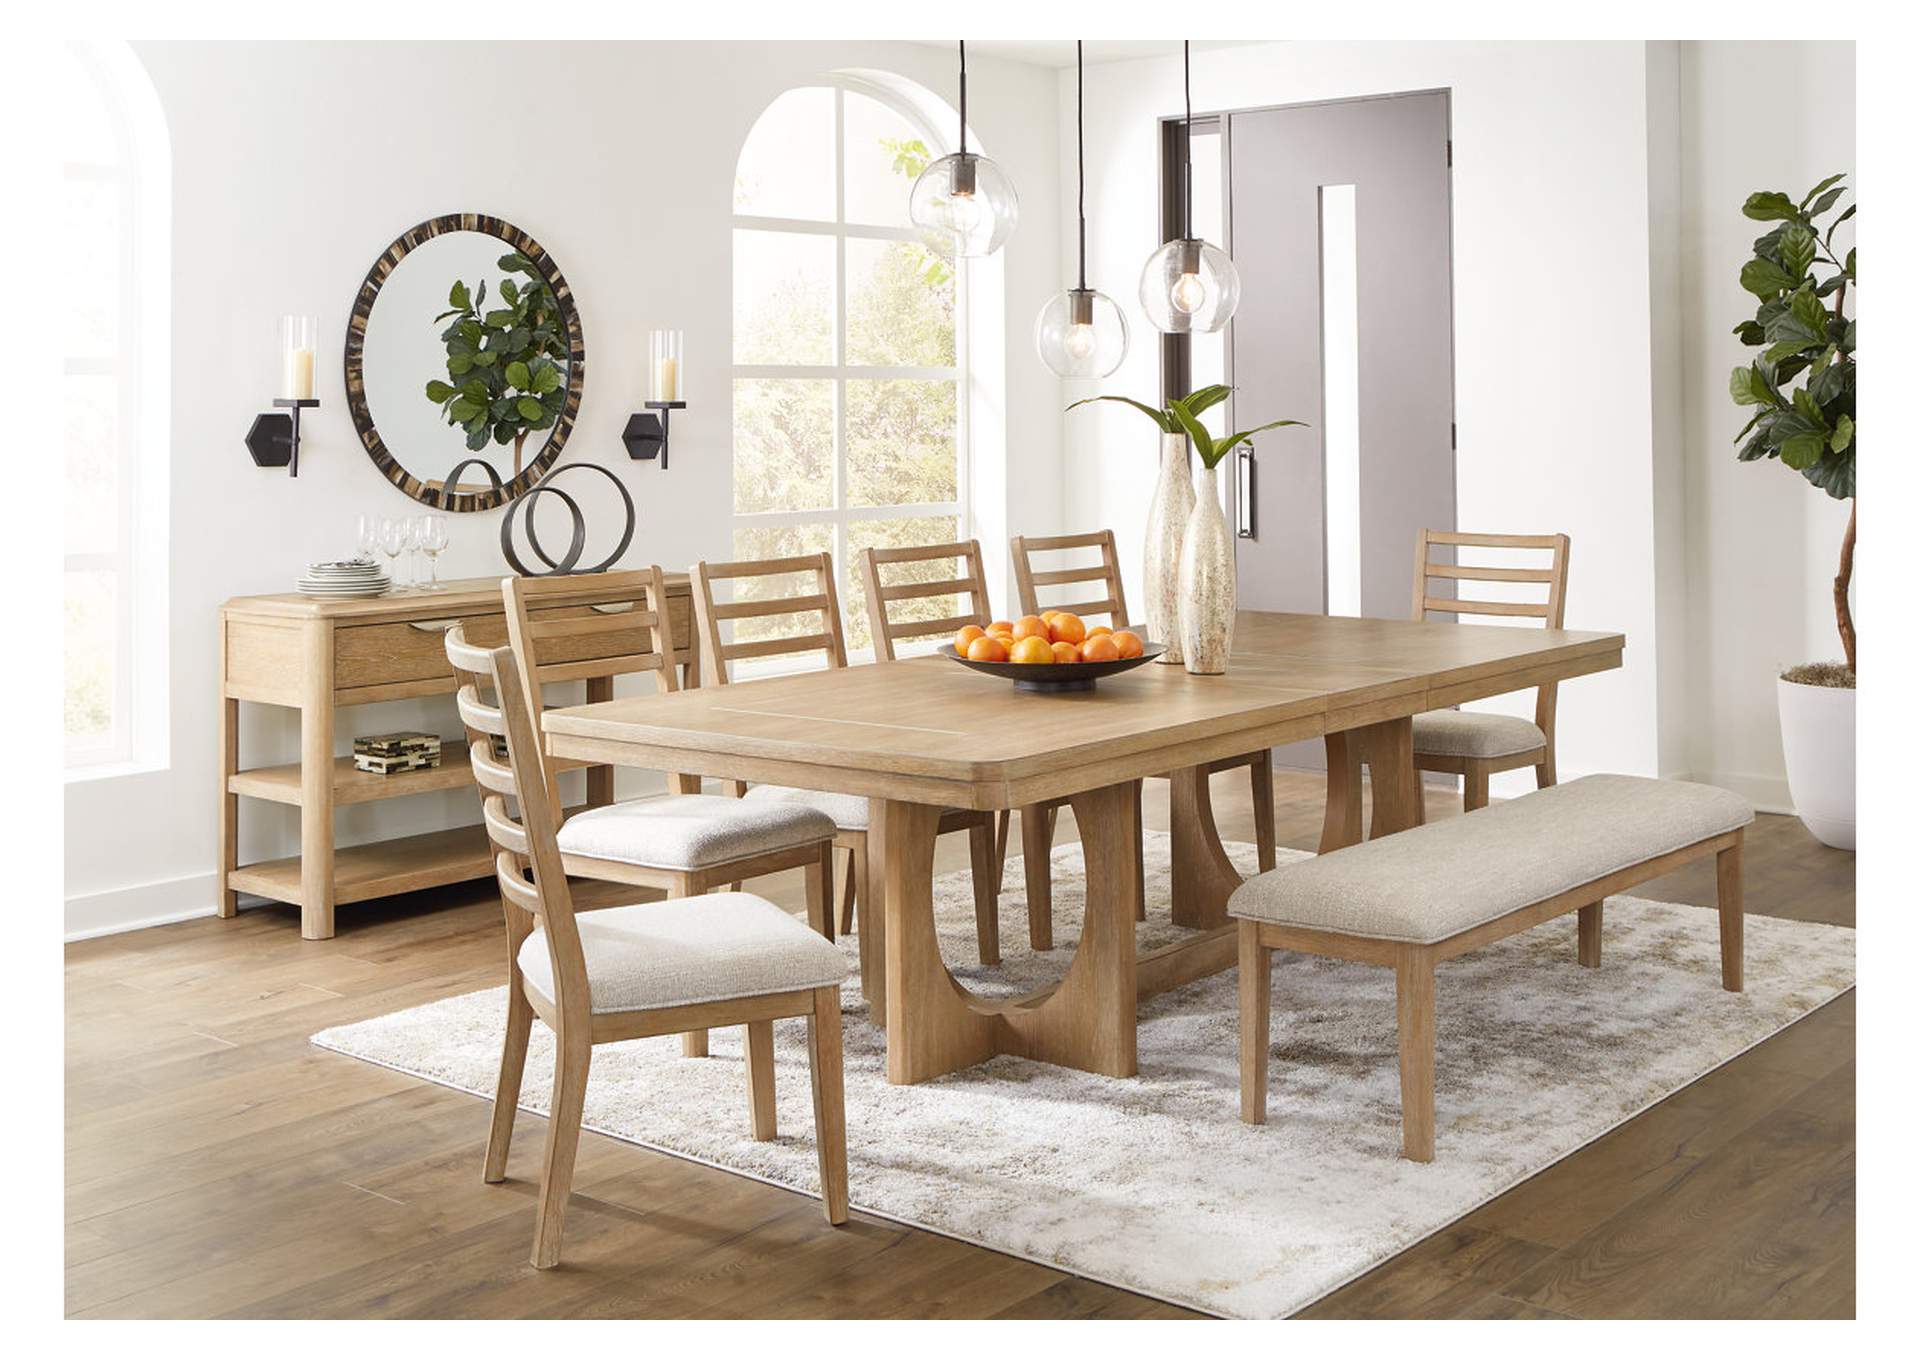 Rencott Dining Extension Table,Ashley